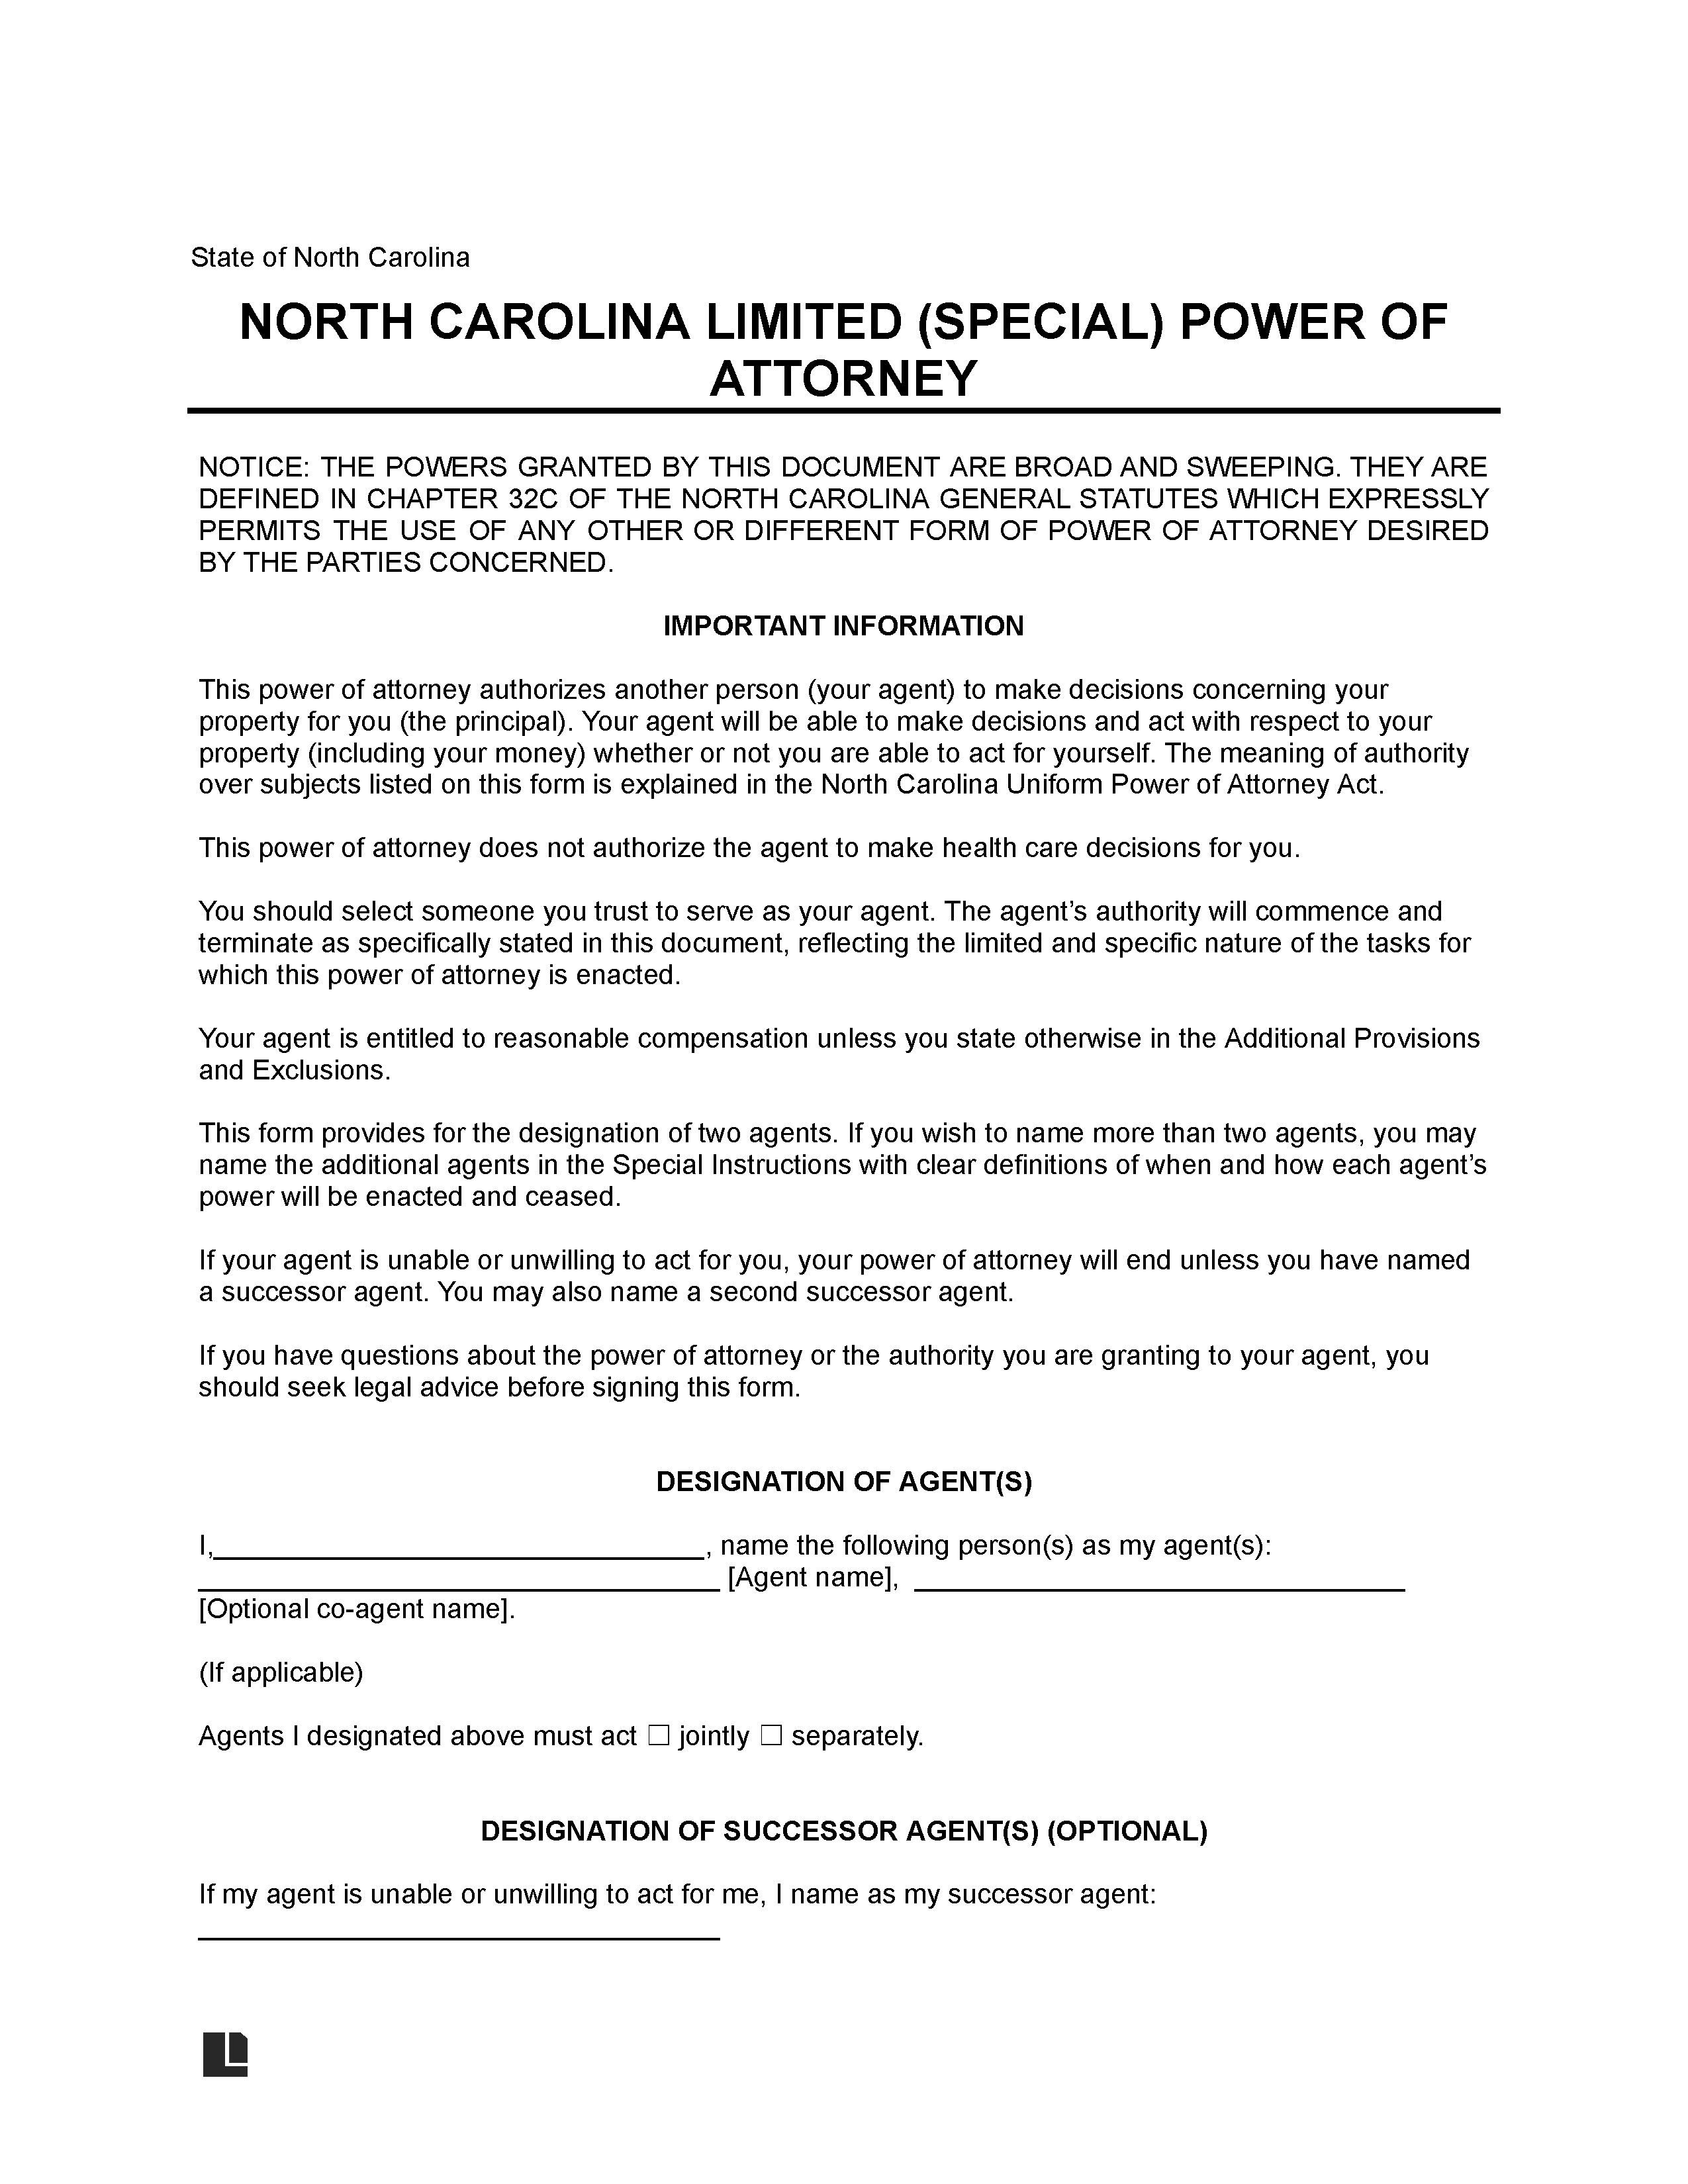 North Carolina Limited Power of Attorney Template